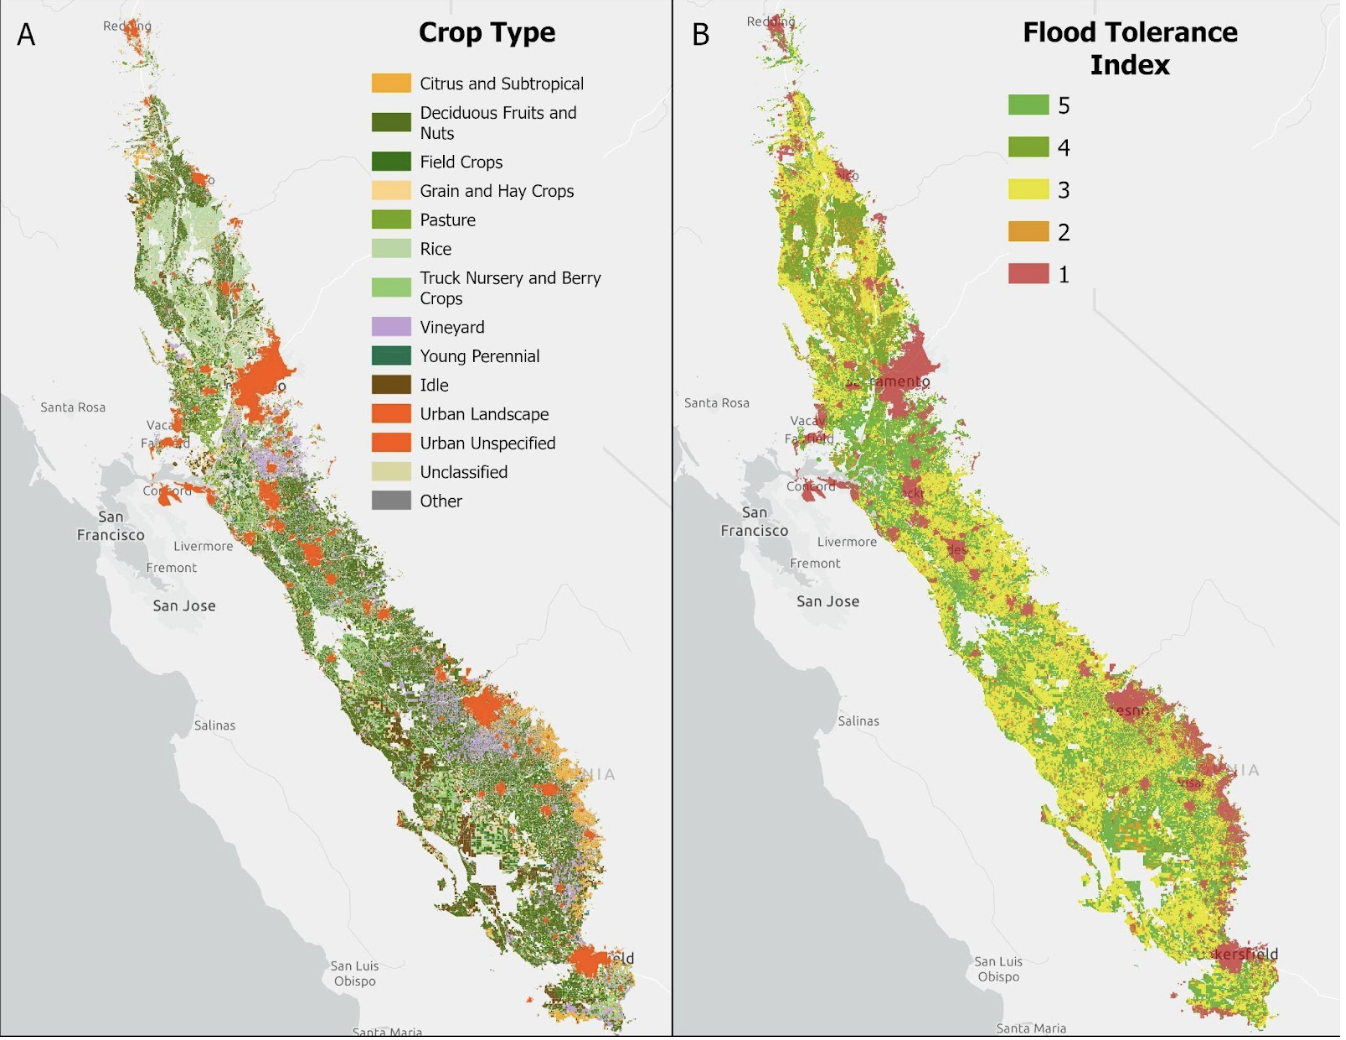 (A) Central Valley 2021 Provisional Crop Mapping Classification (B) Flood Tolerance Index 